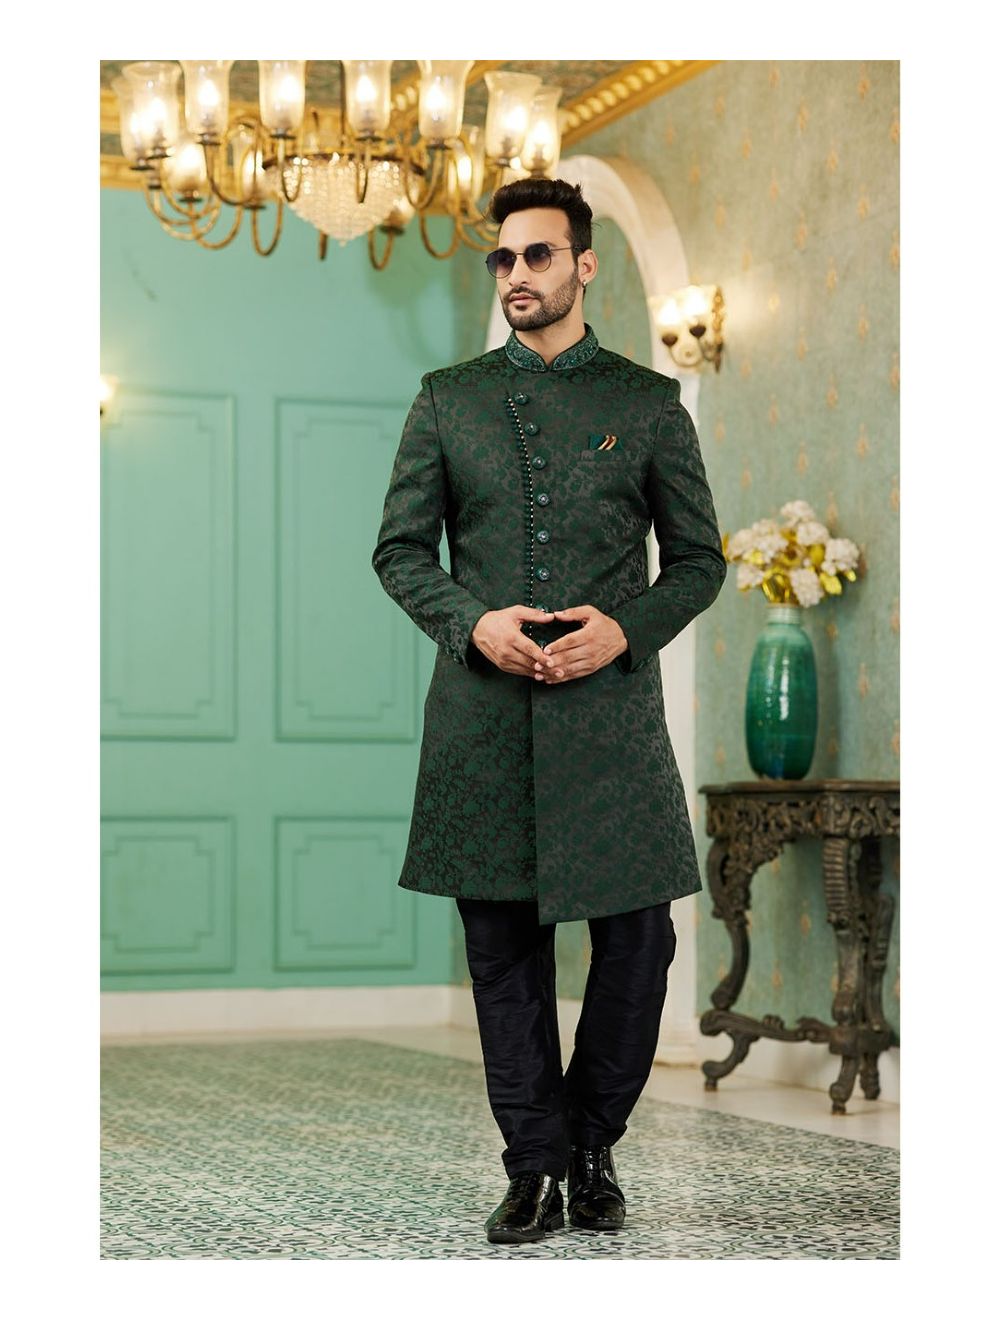 Green - Pants & Trousers - Indo Western Dresses: Buy Latest Indo